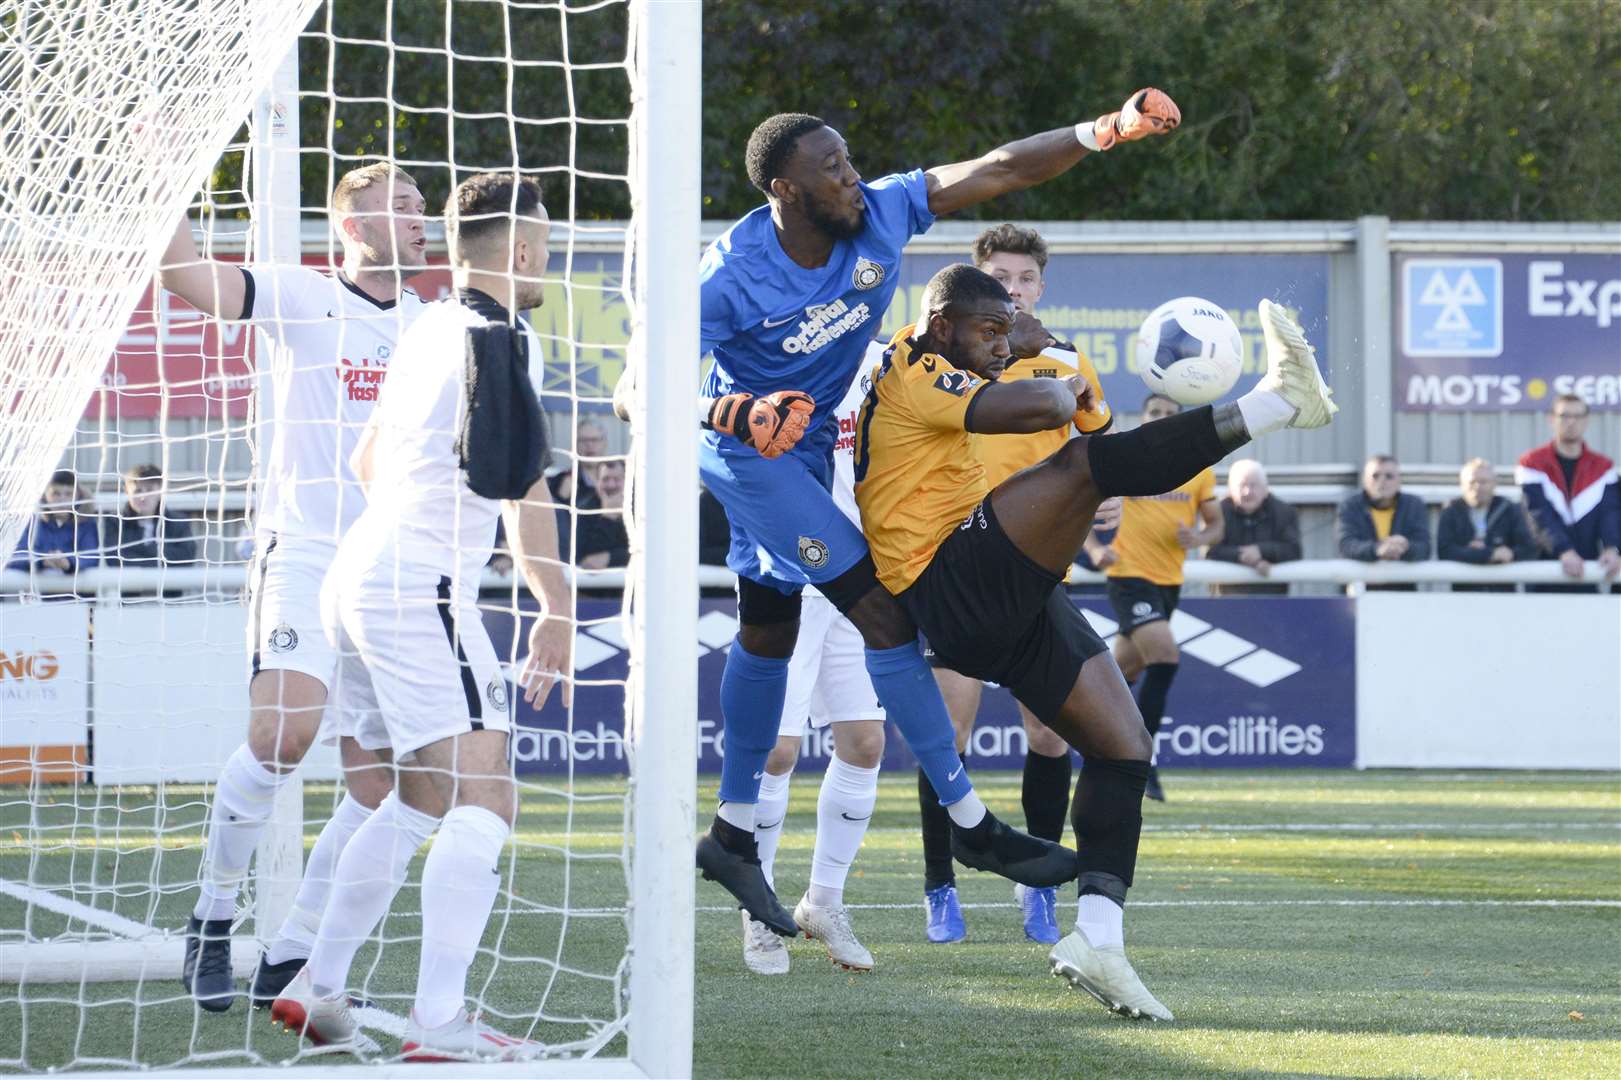 Maidstone striker Ibby Akanbi can't quite convert Picture: Paul Amos